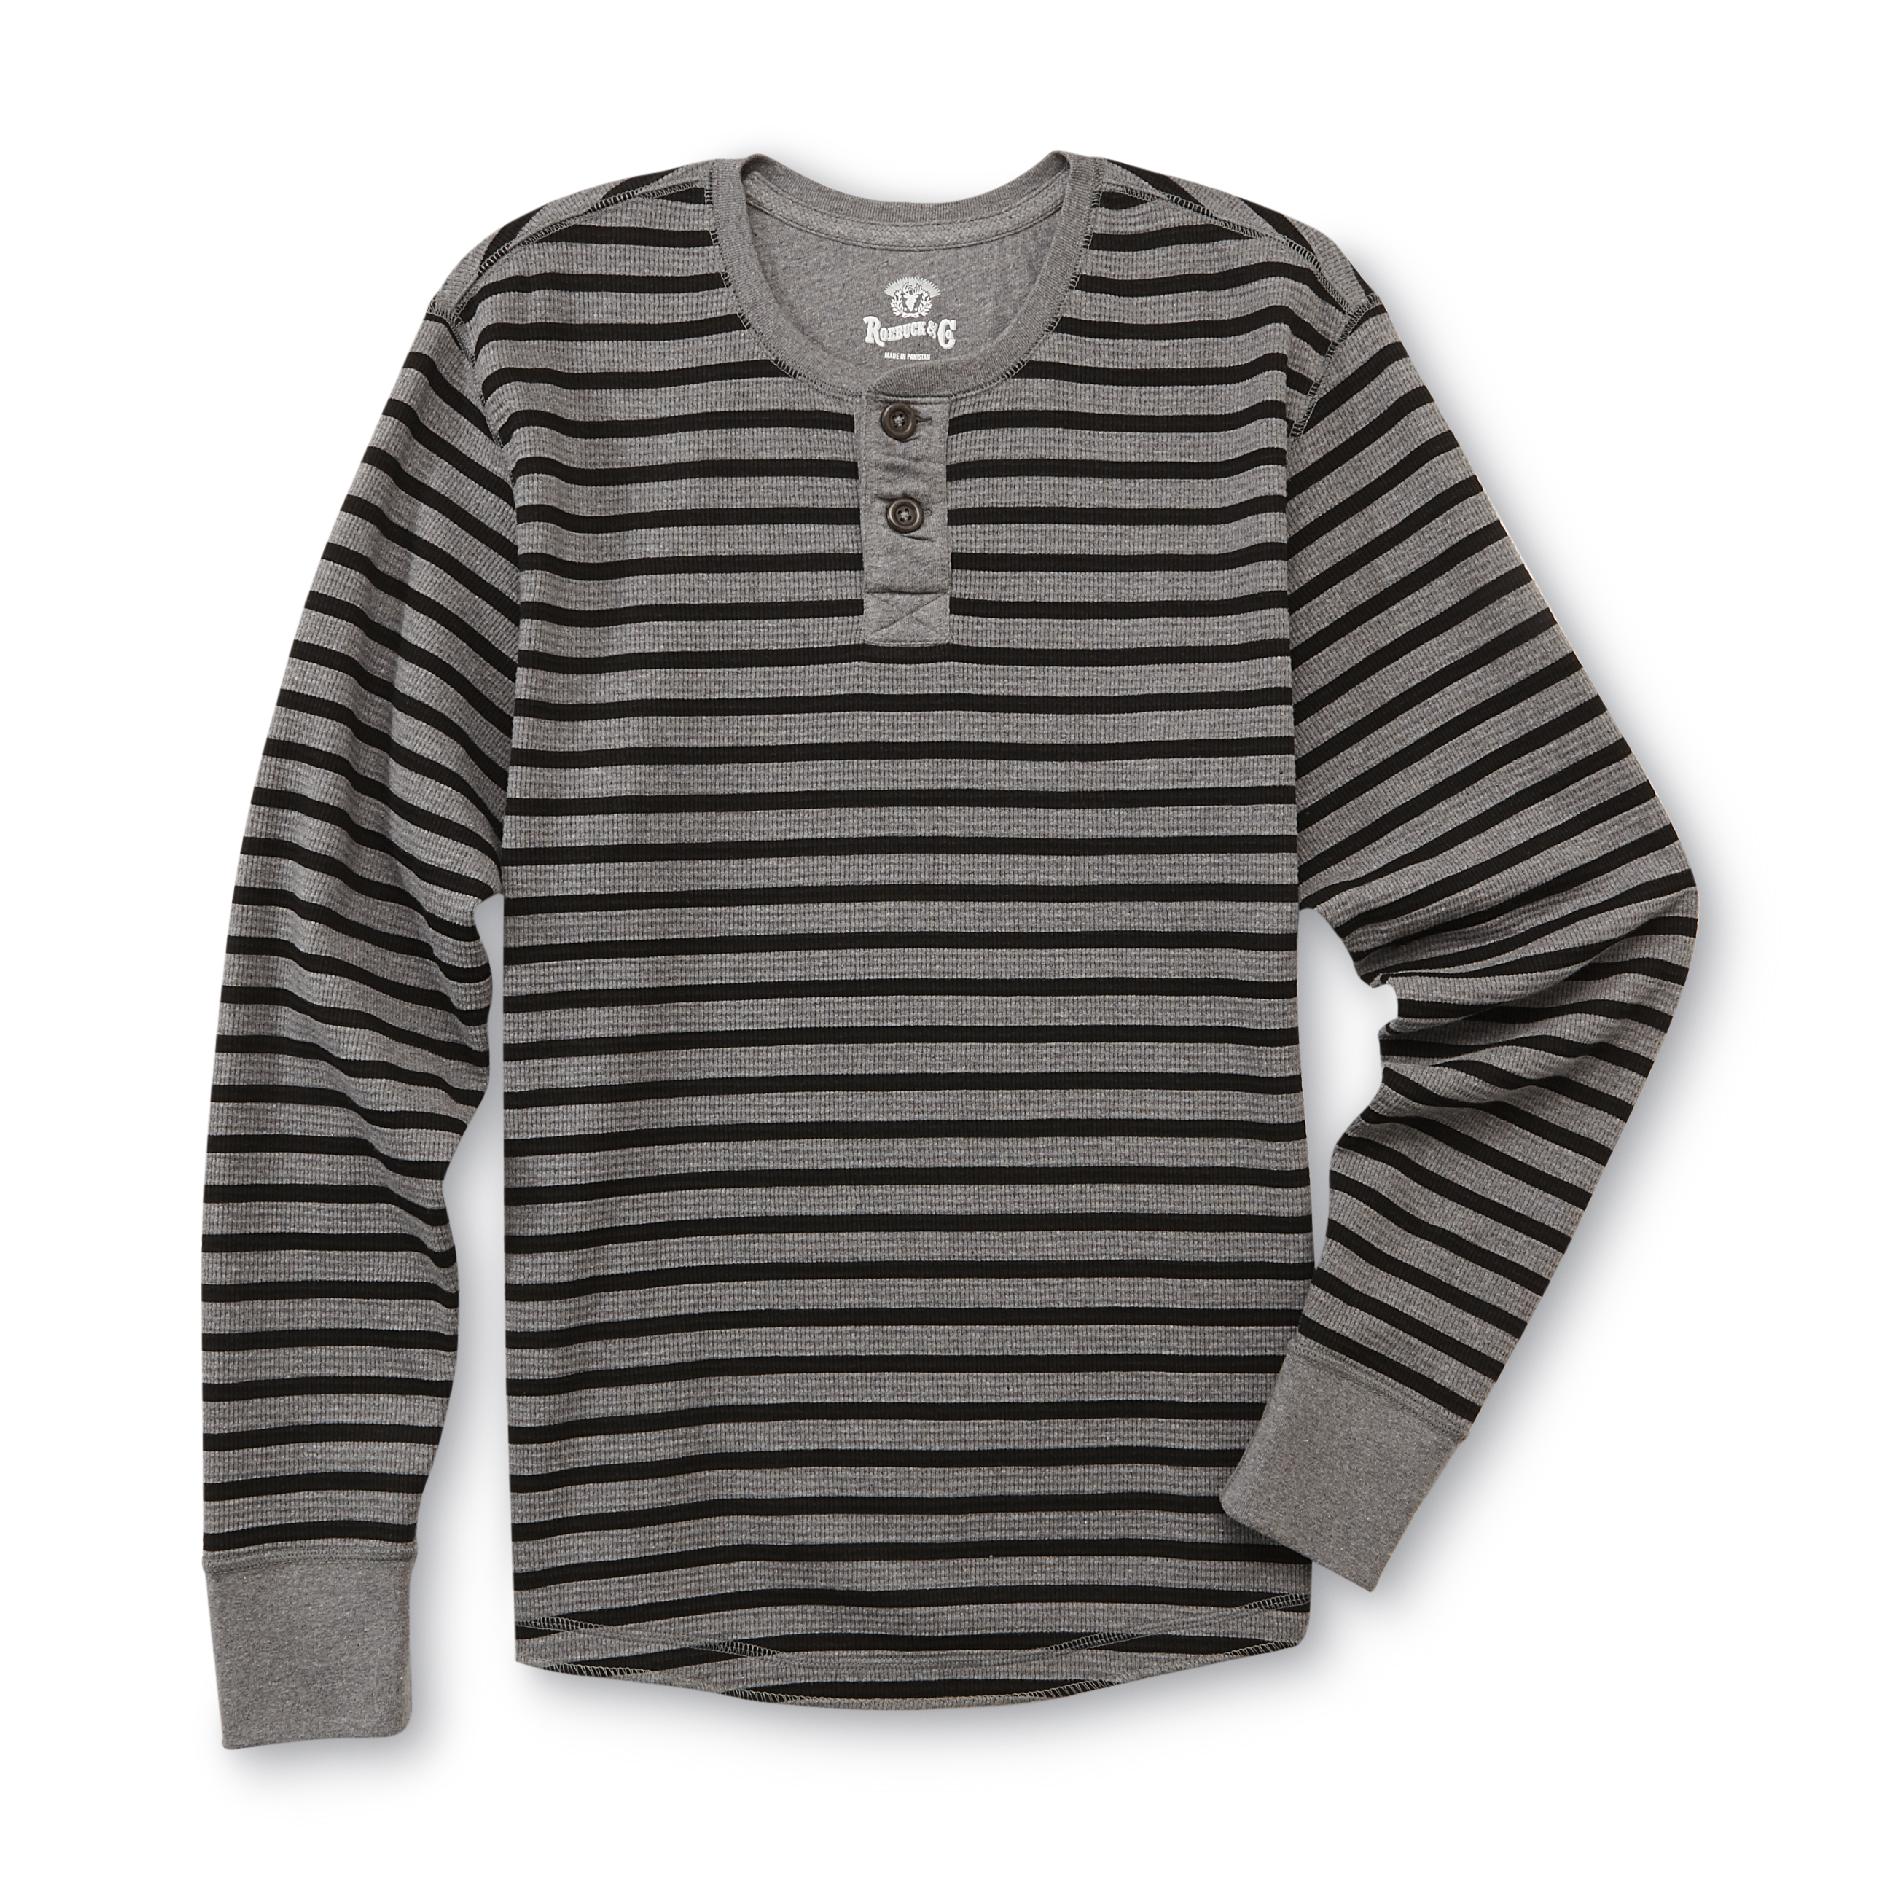 Roebuck & Co. Young Men's Thermal Henley Shirt - Striped